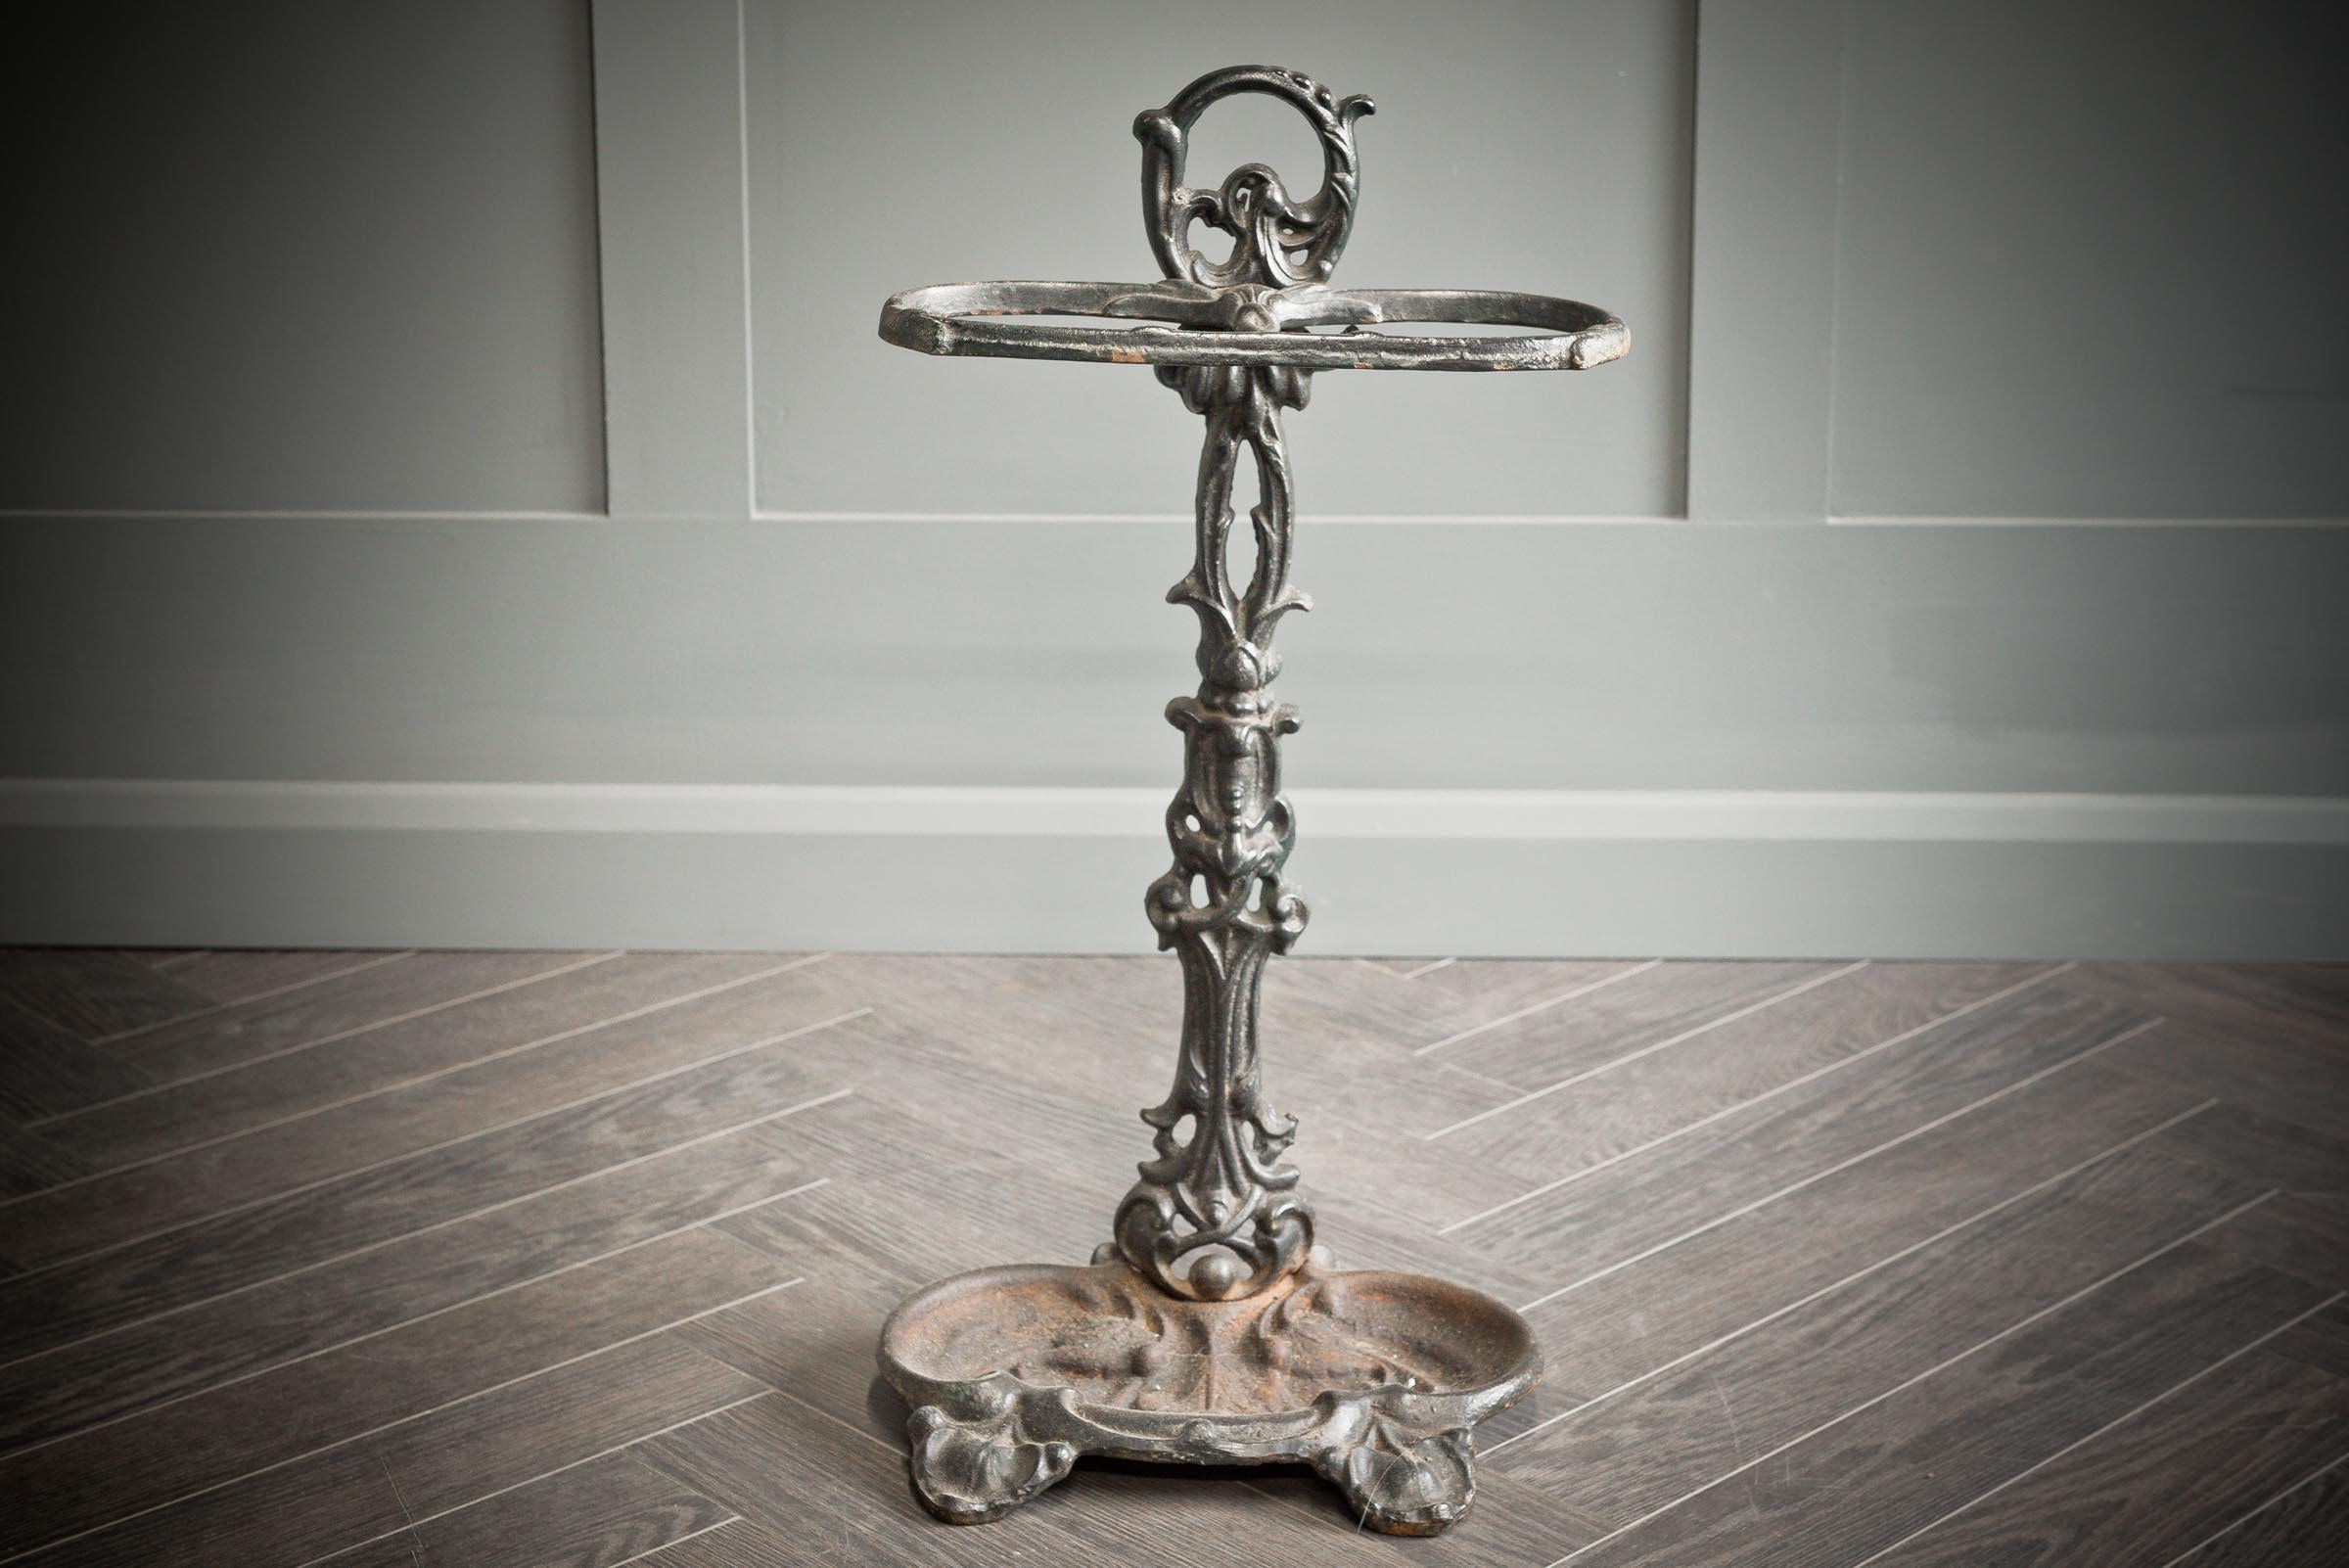 Wonderful example of an umbrella stand from the late victorian period. This stand is produced in cast iron and holds fine detailing showcasing the typical art nouveau period. This would complete the look for any hallway or cloakroom.